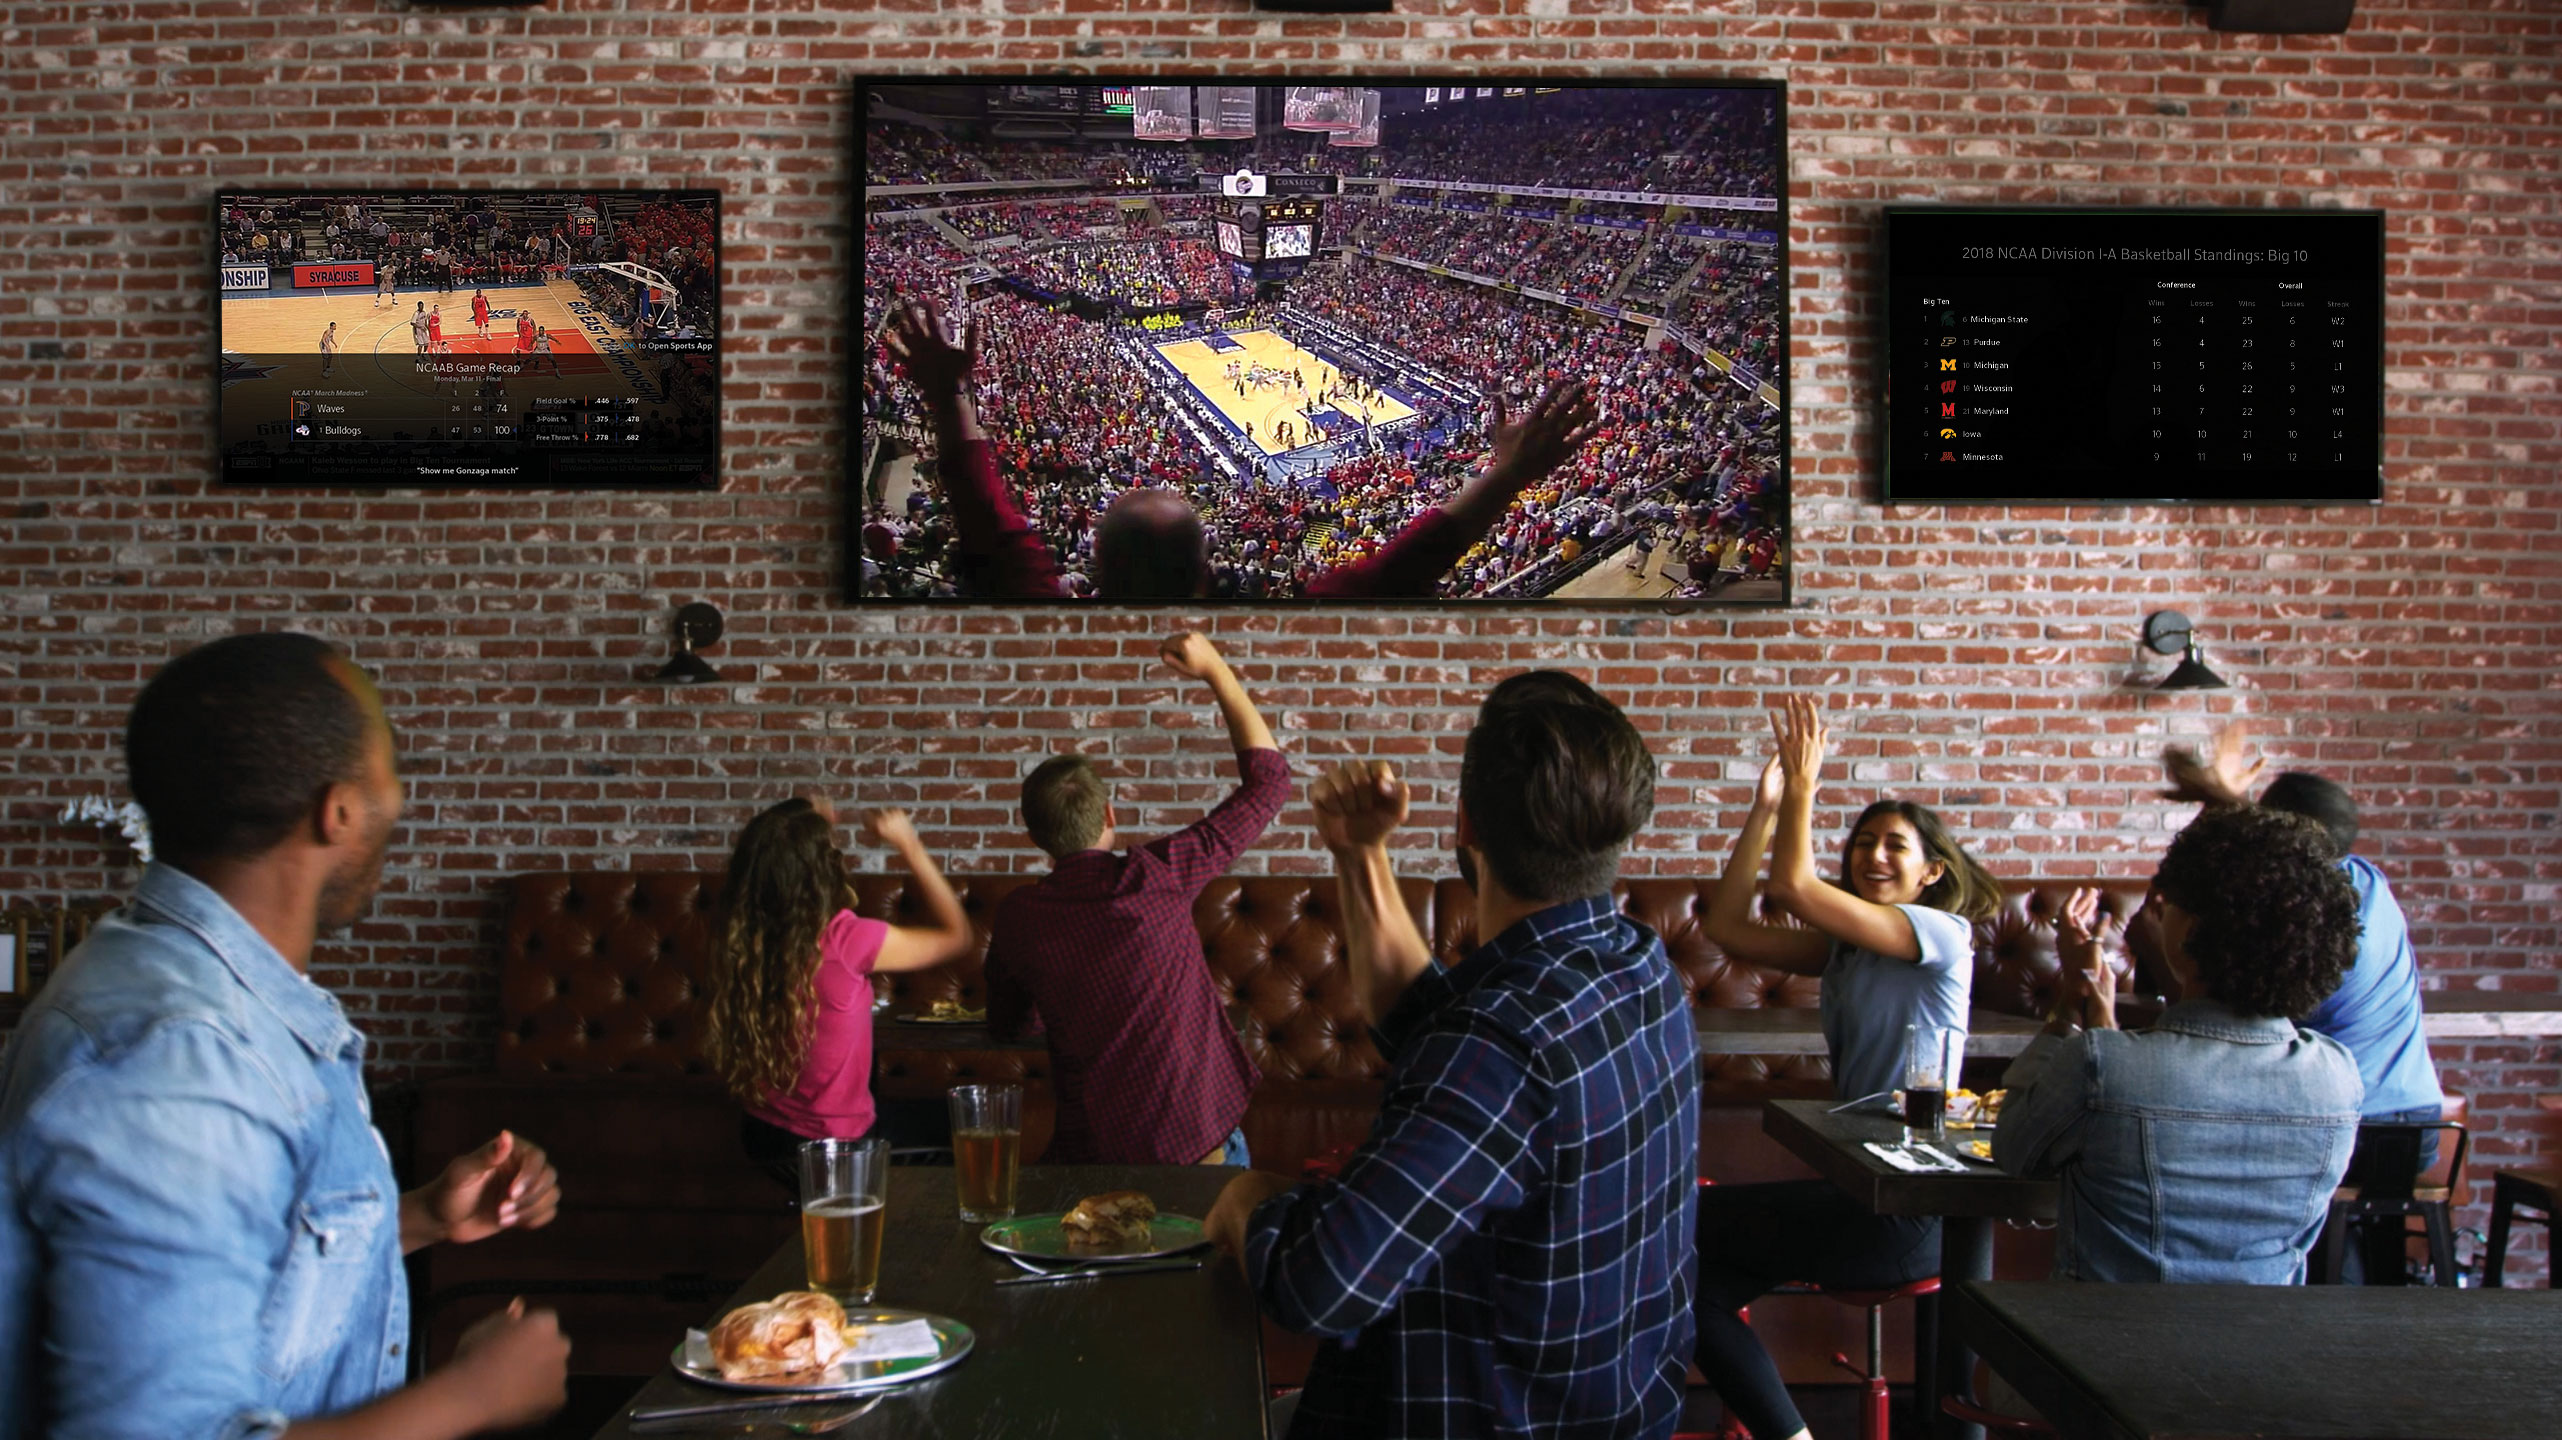 Comcast X1 for Business, March Madness 2019